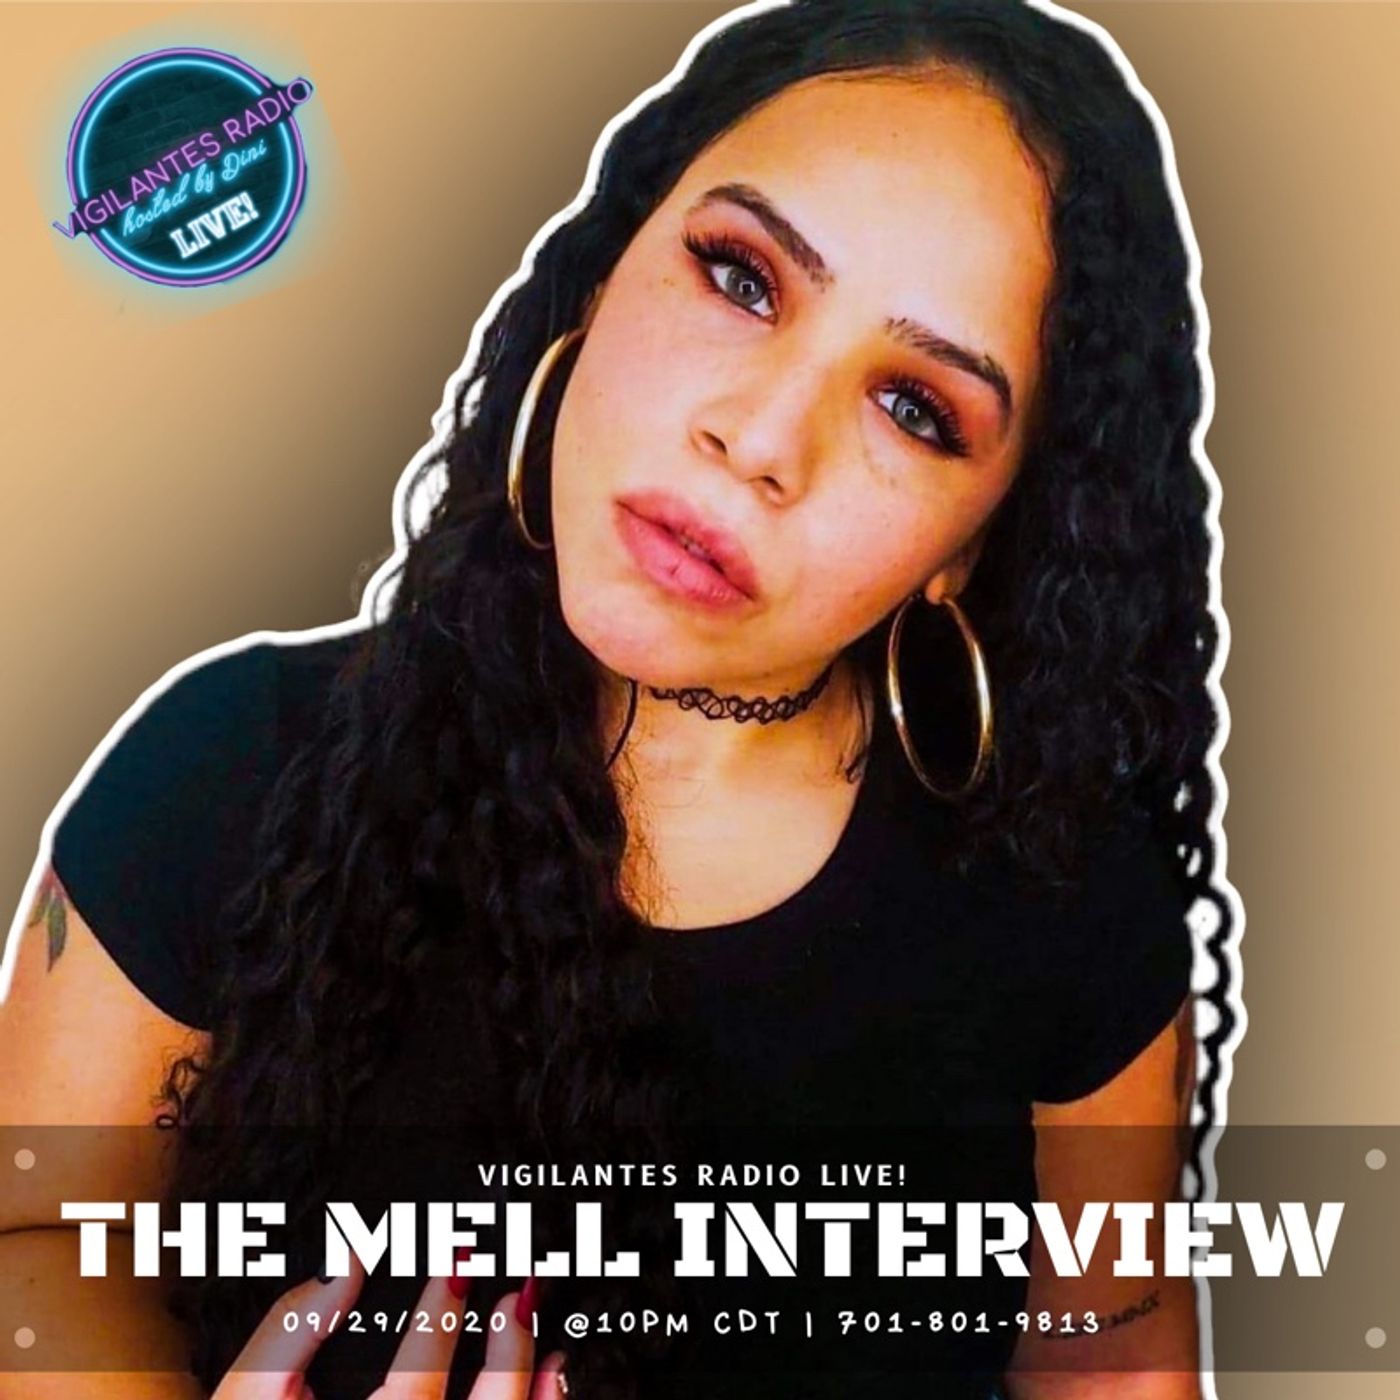 The Mell Interview. Image